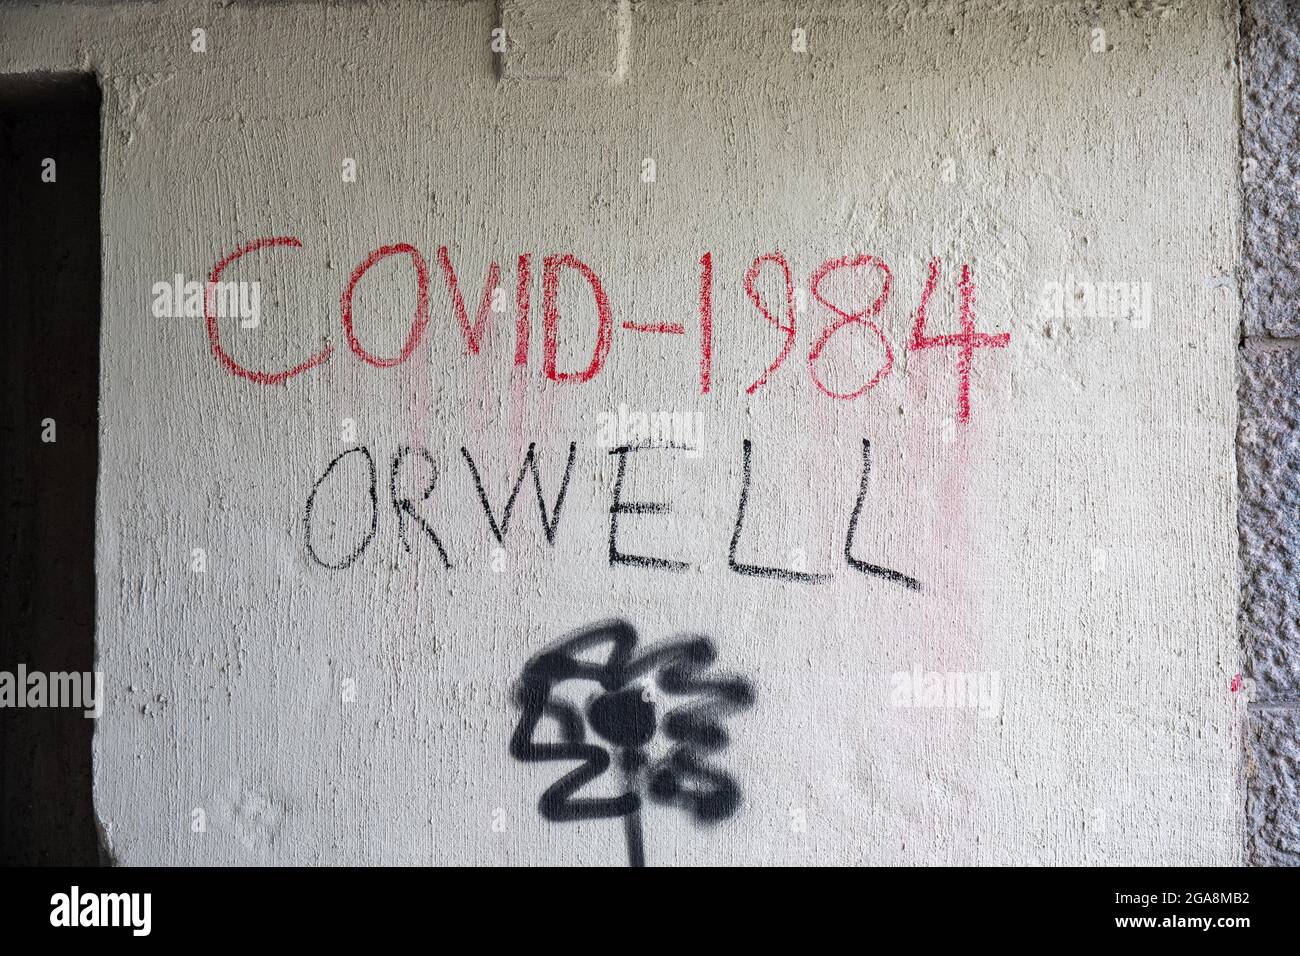 Covid-1984 Orwell. Covid sceptic writing on the wall. Stock Photo